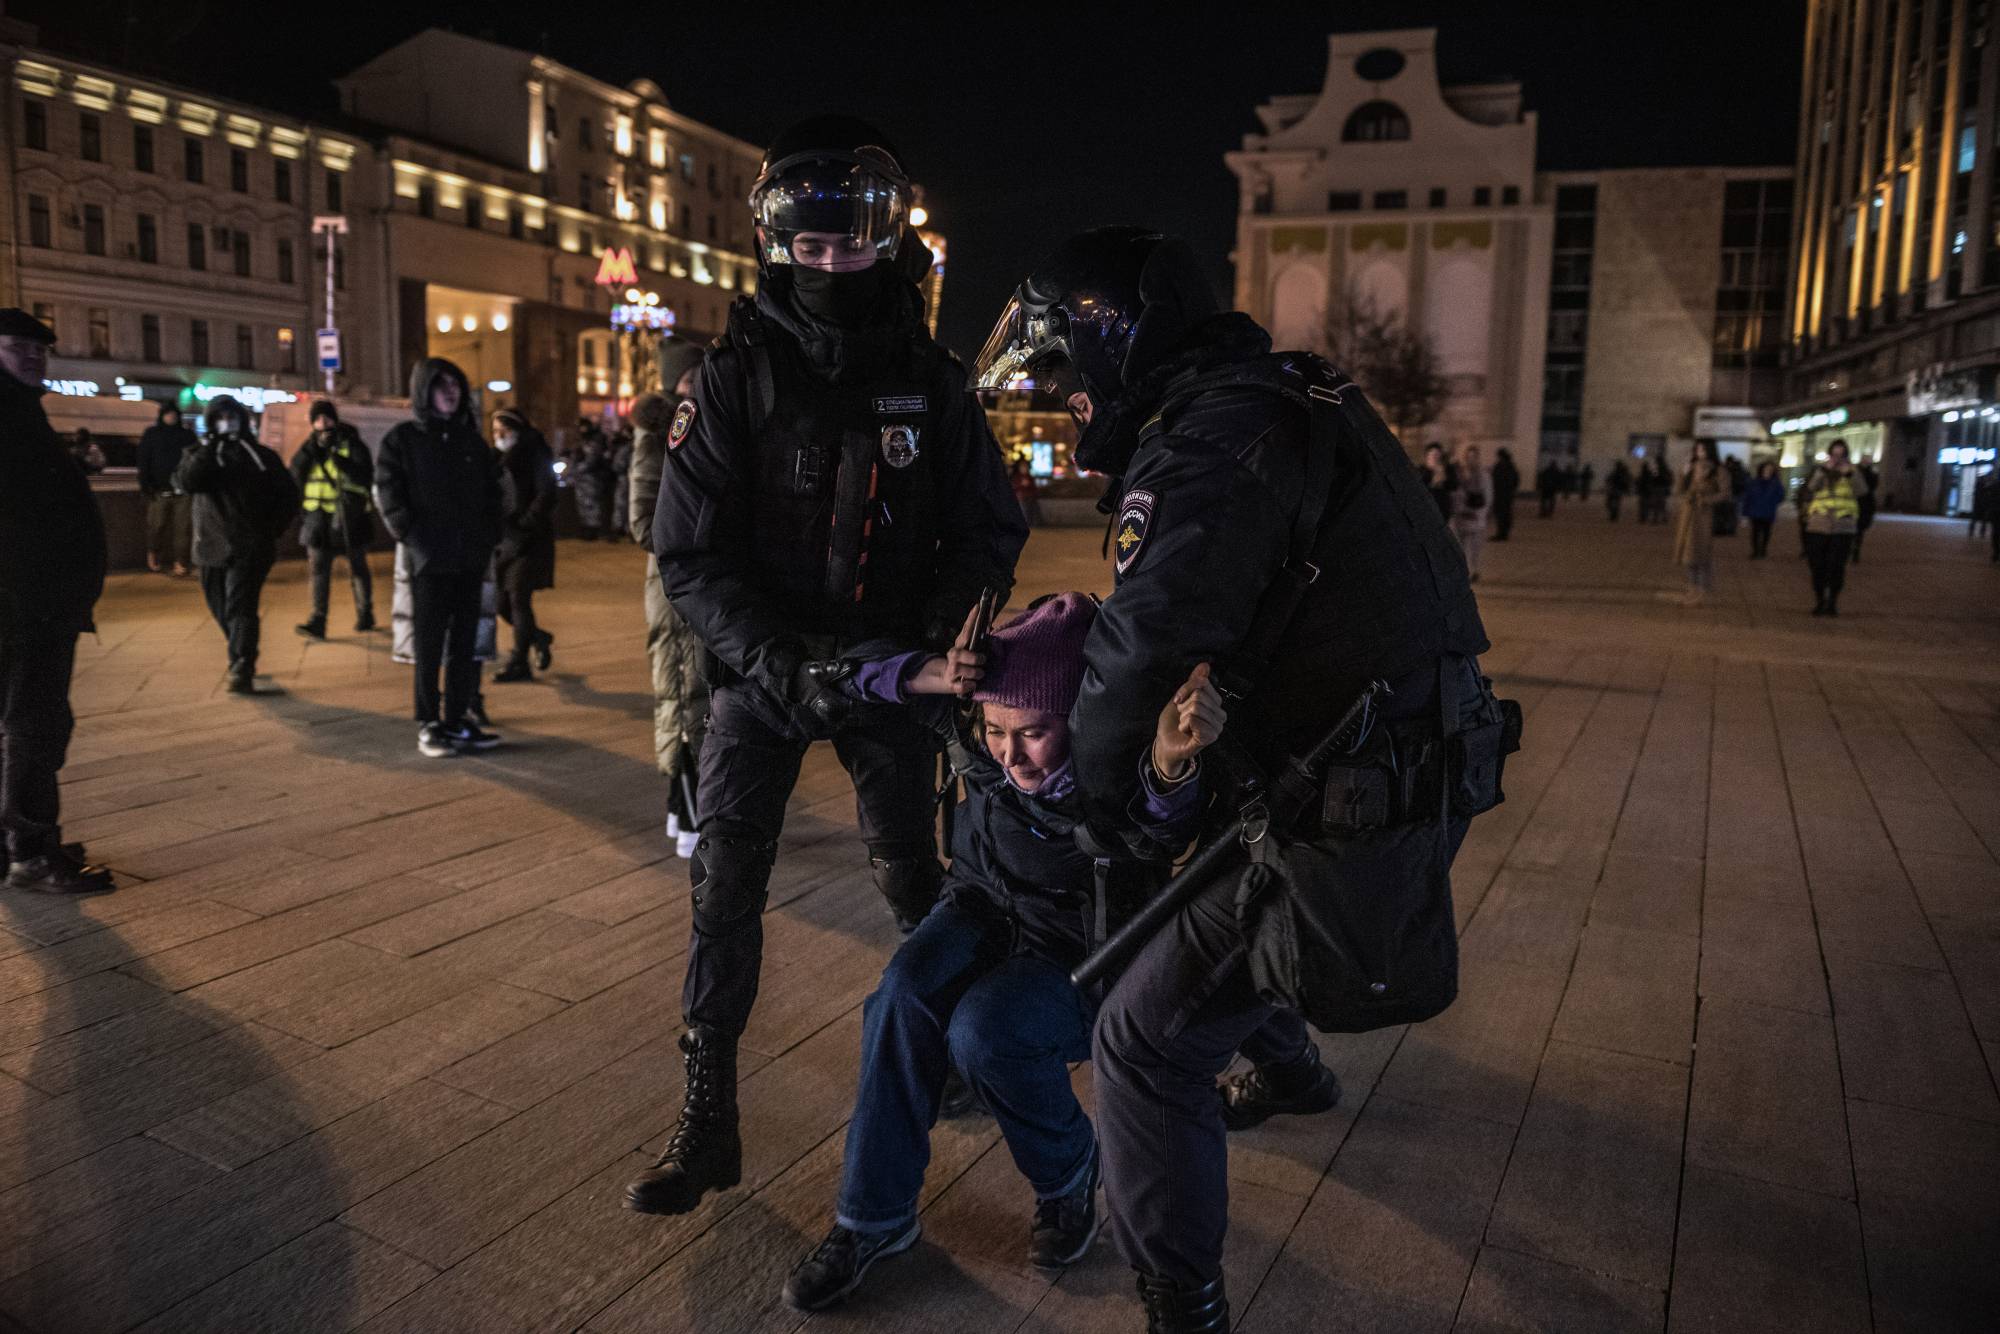 Moscow police detain an anti-war protester on Feb. 25. Protests have largely dried up in recent weeks.  | SERGEY PONOMAREV/THE NEW YORK TIMES